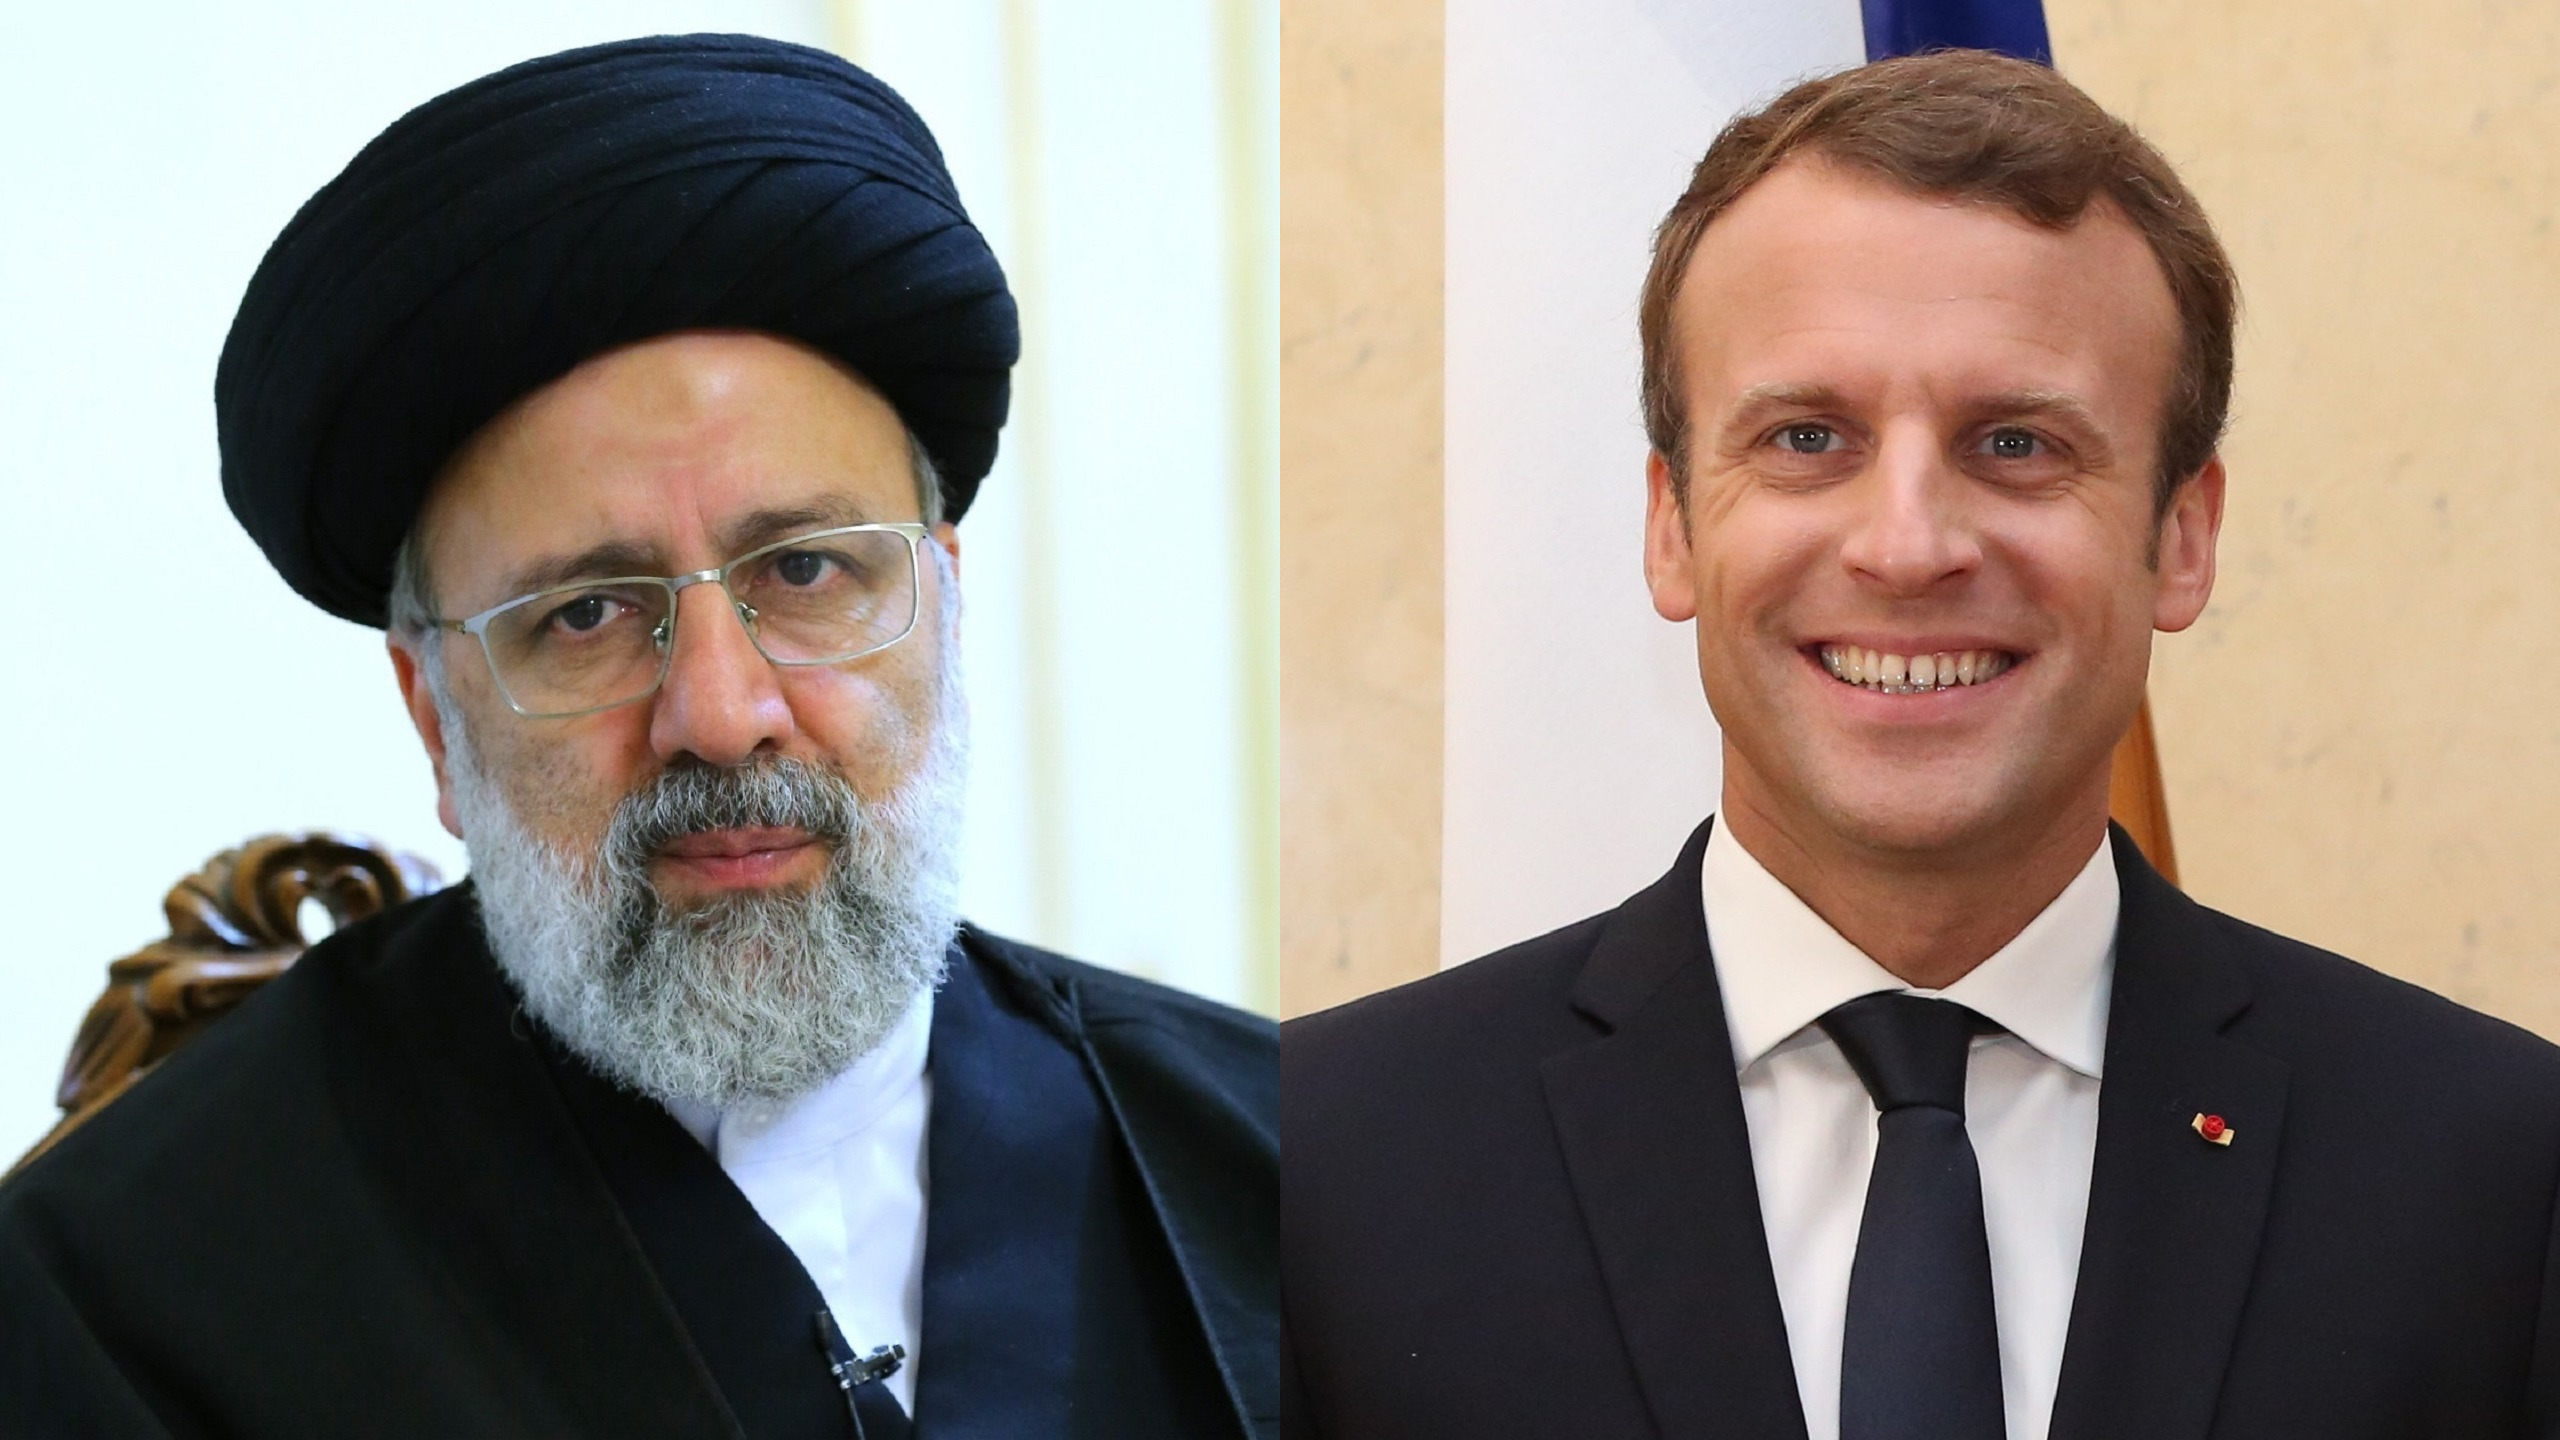 Iran’s President to French Counterpart: Nuclear Deal Requires Guarantees, End to IAEA Inquiry